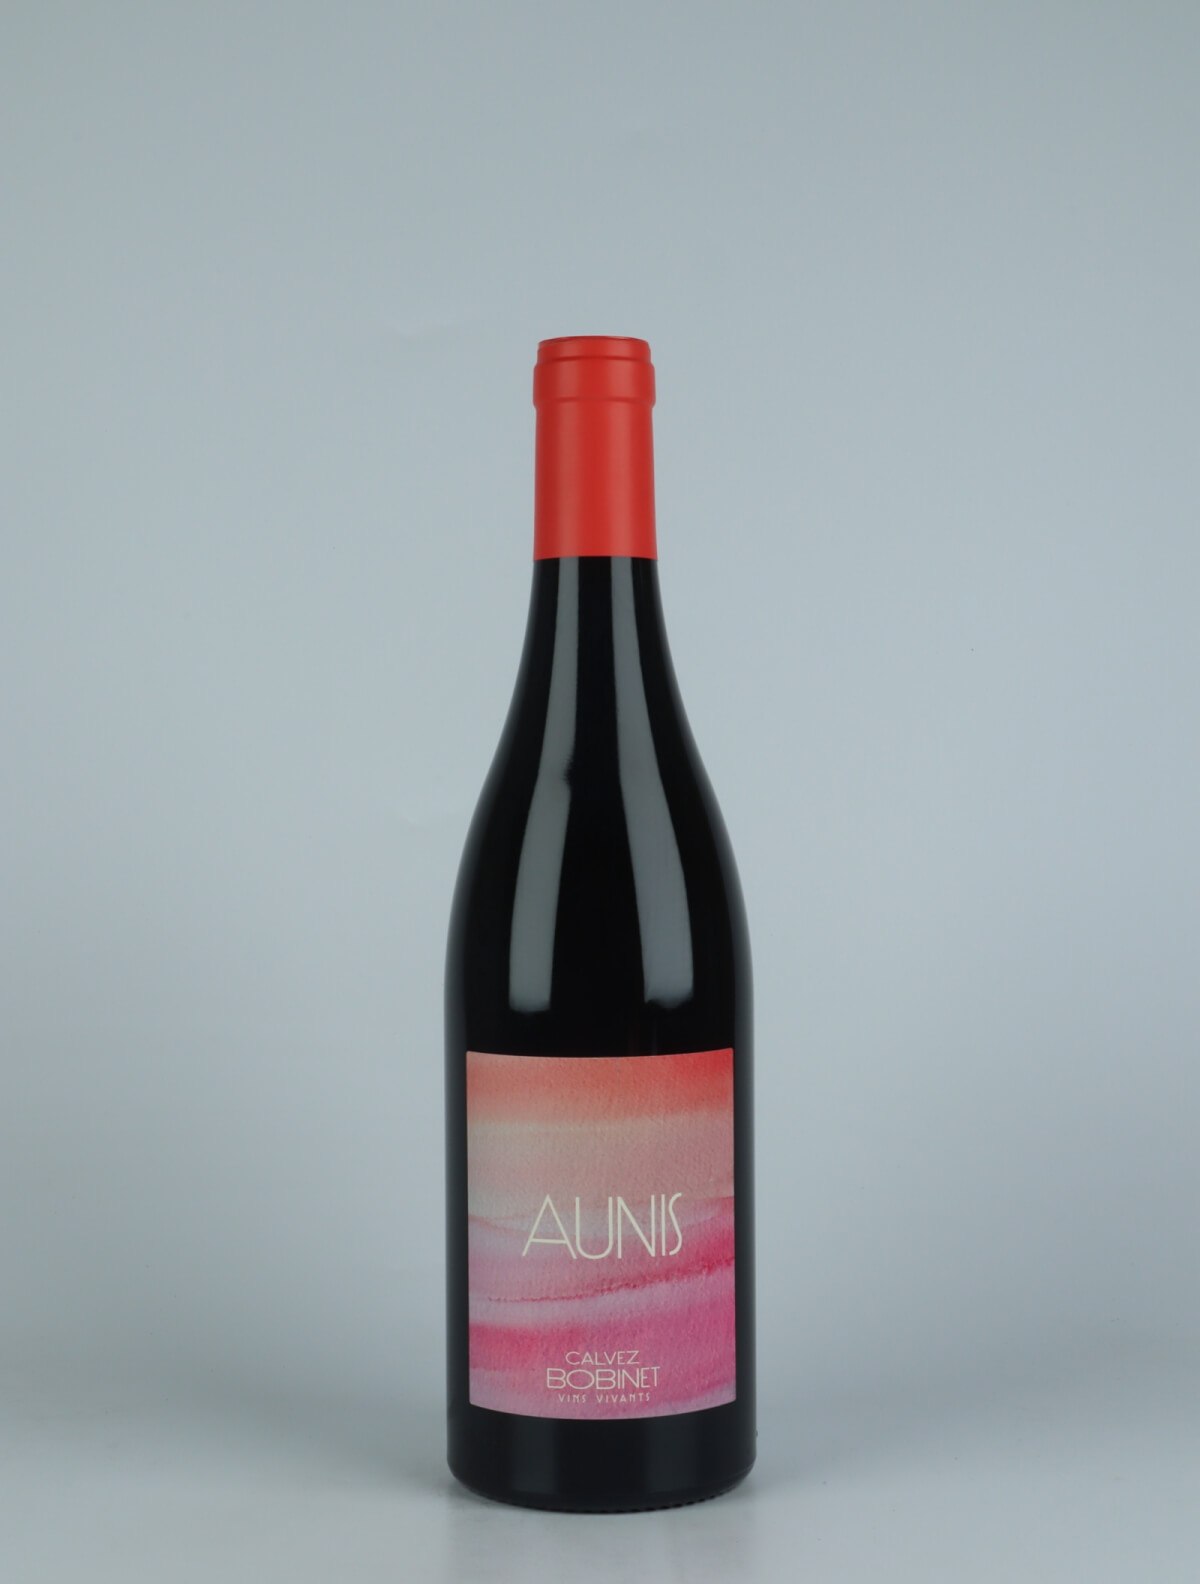 A bottle 2022 Aunis Red wine from Domaine Bobinet, Loire in France